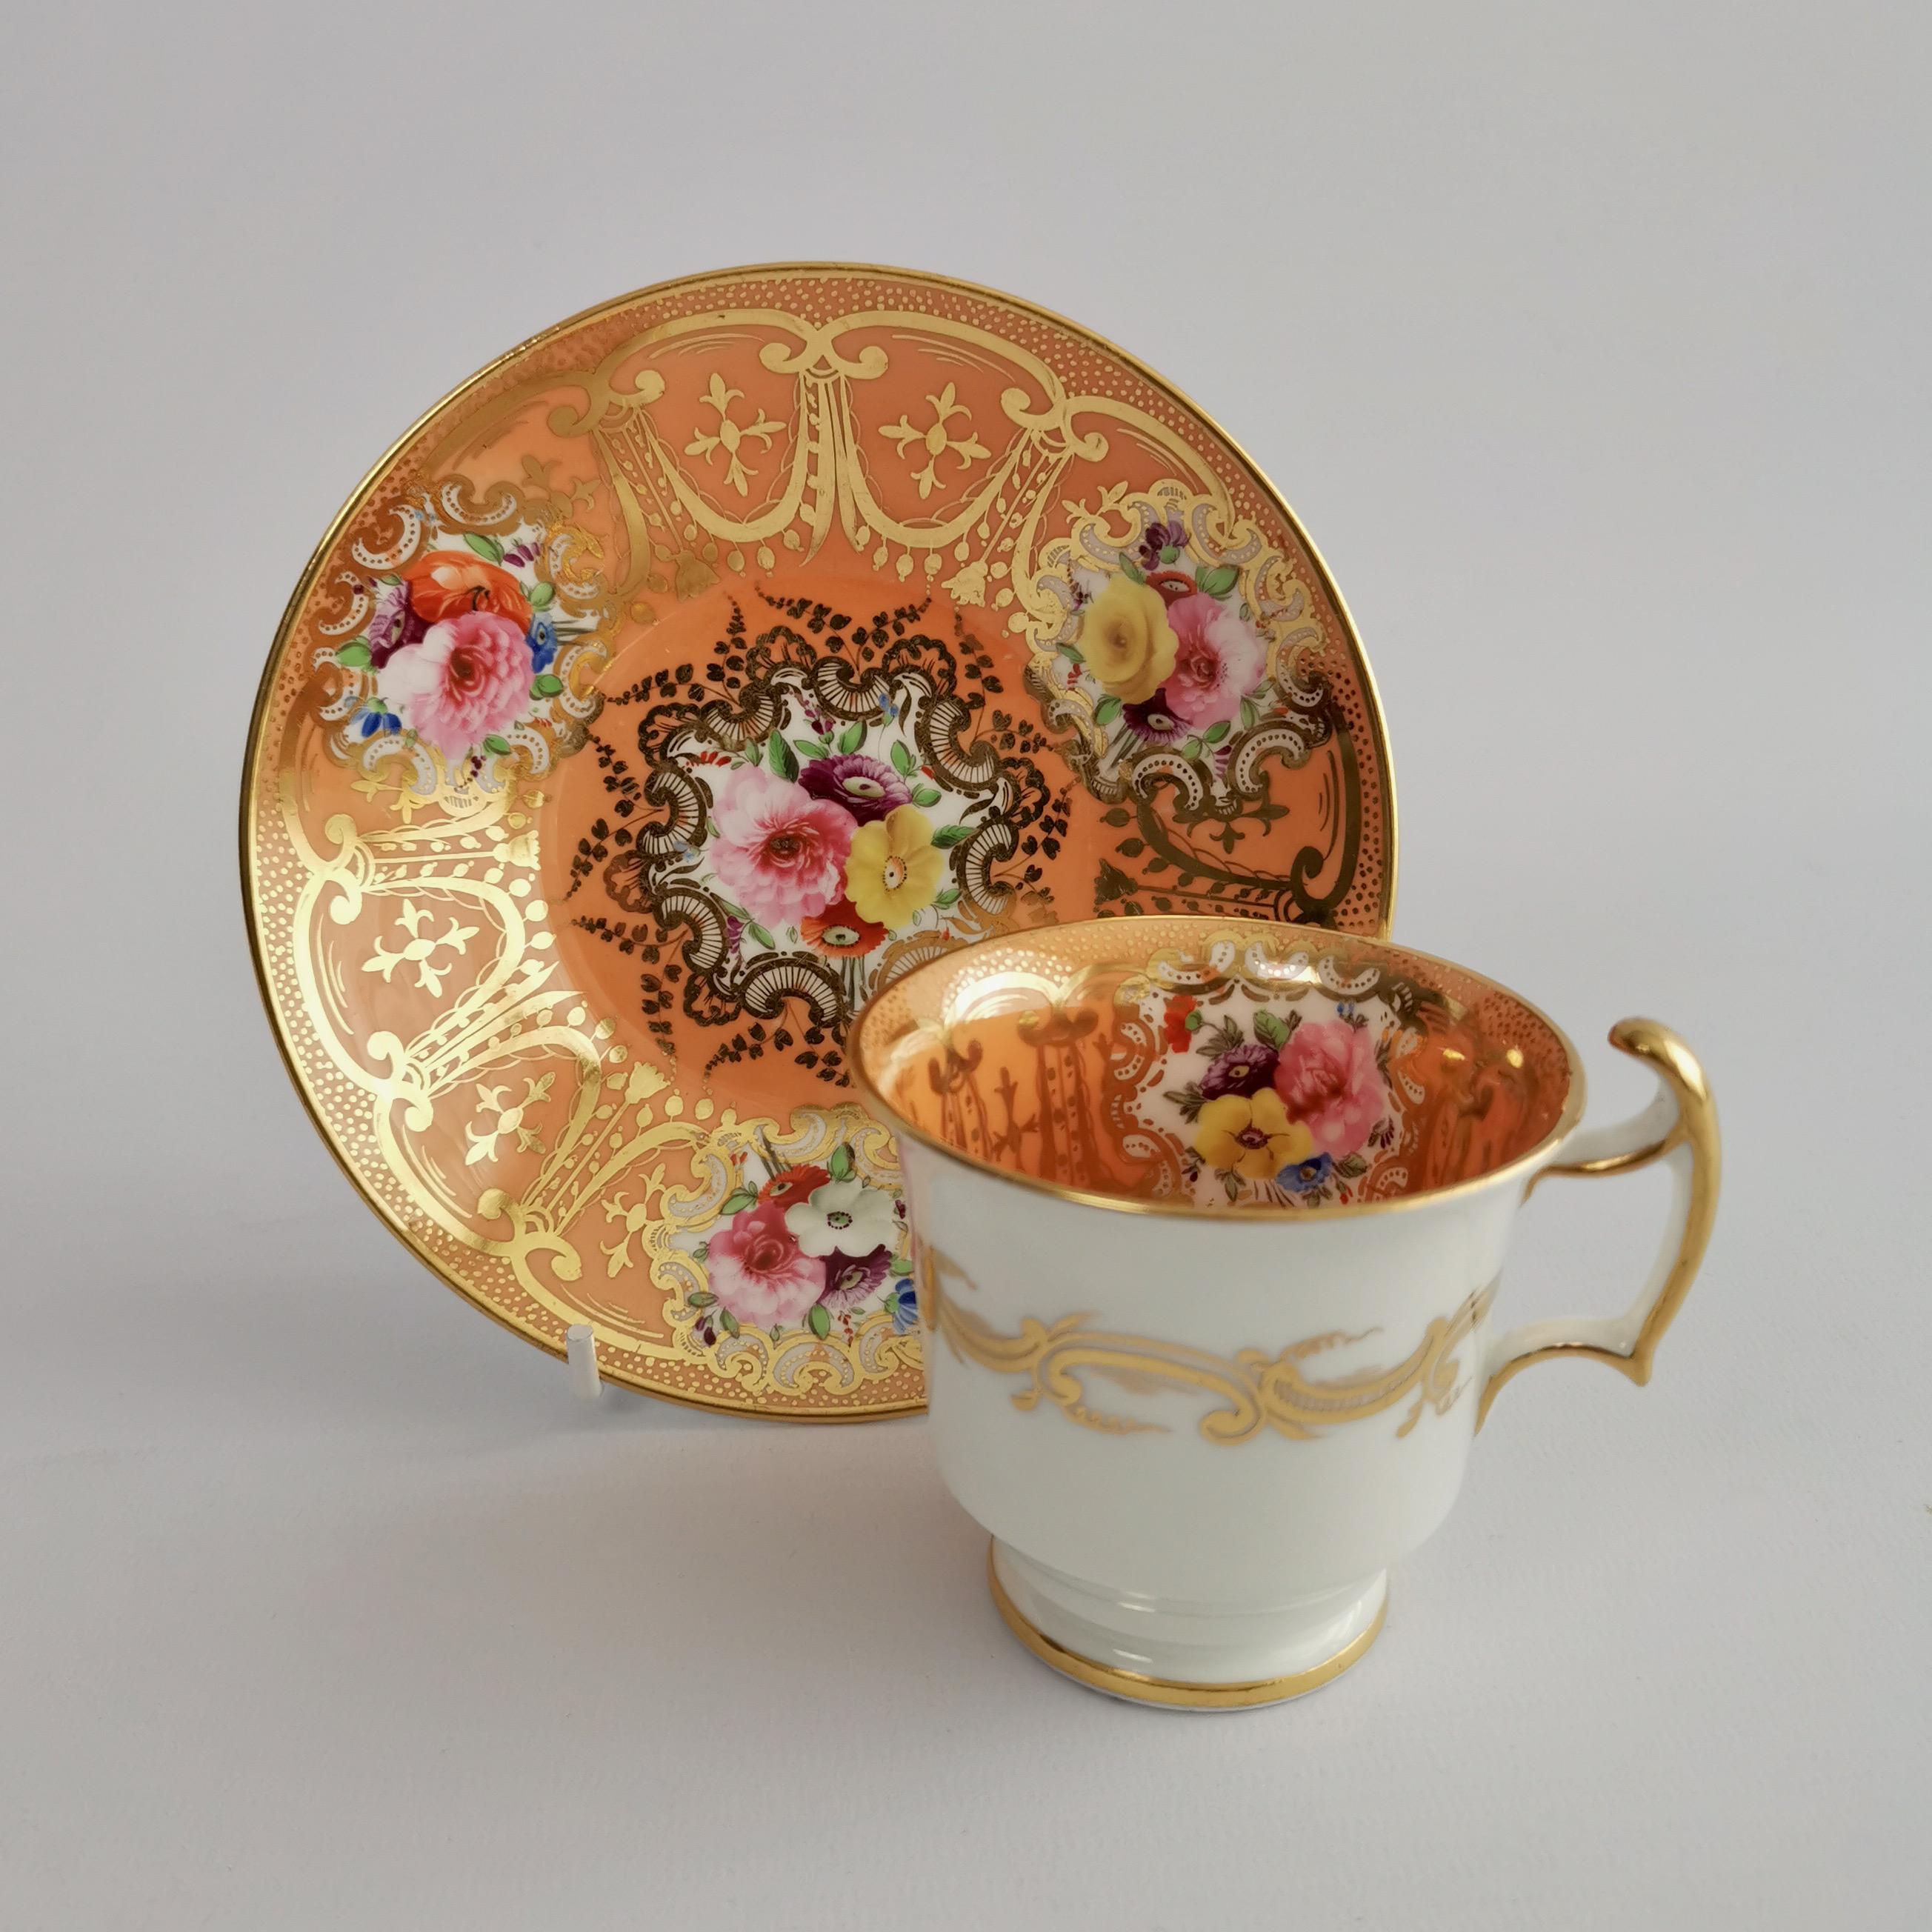 This is a sublime coffee cup and saucer made by Coalport in about 1815. The set has an orange/peach ground with floral reserves and superbly rich gilding.

Coalport was one of the leading potters in 19th and 20th century Staffordshire. They worked